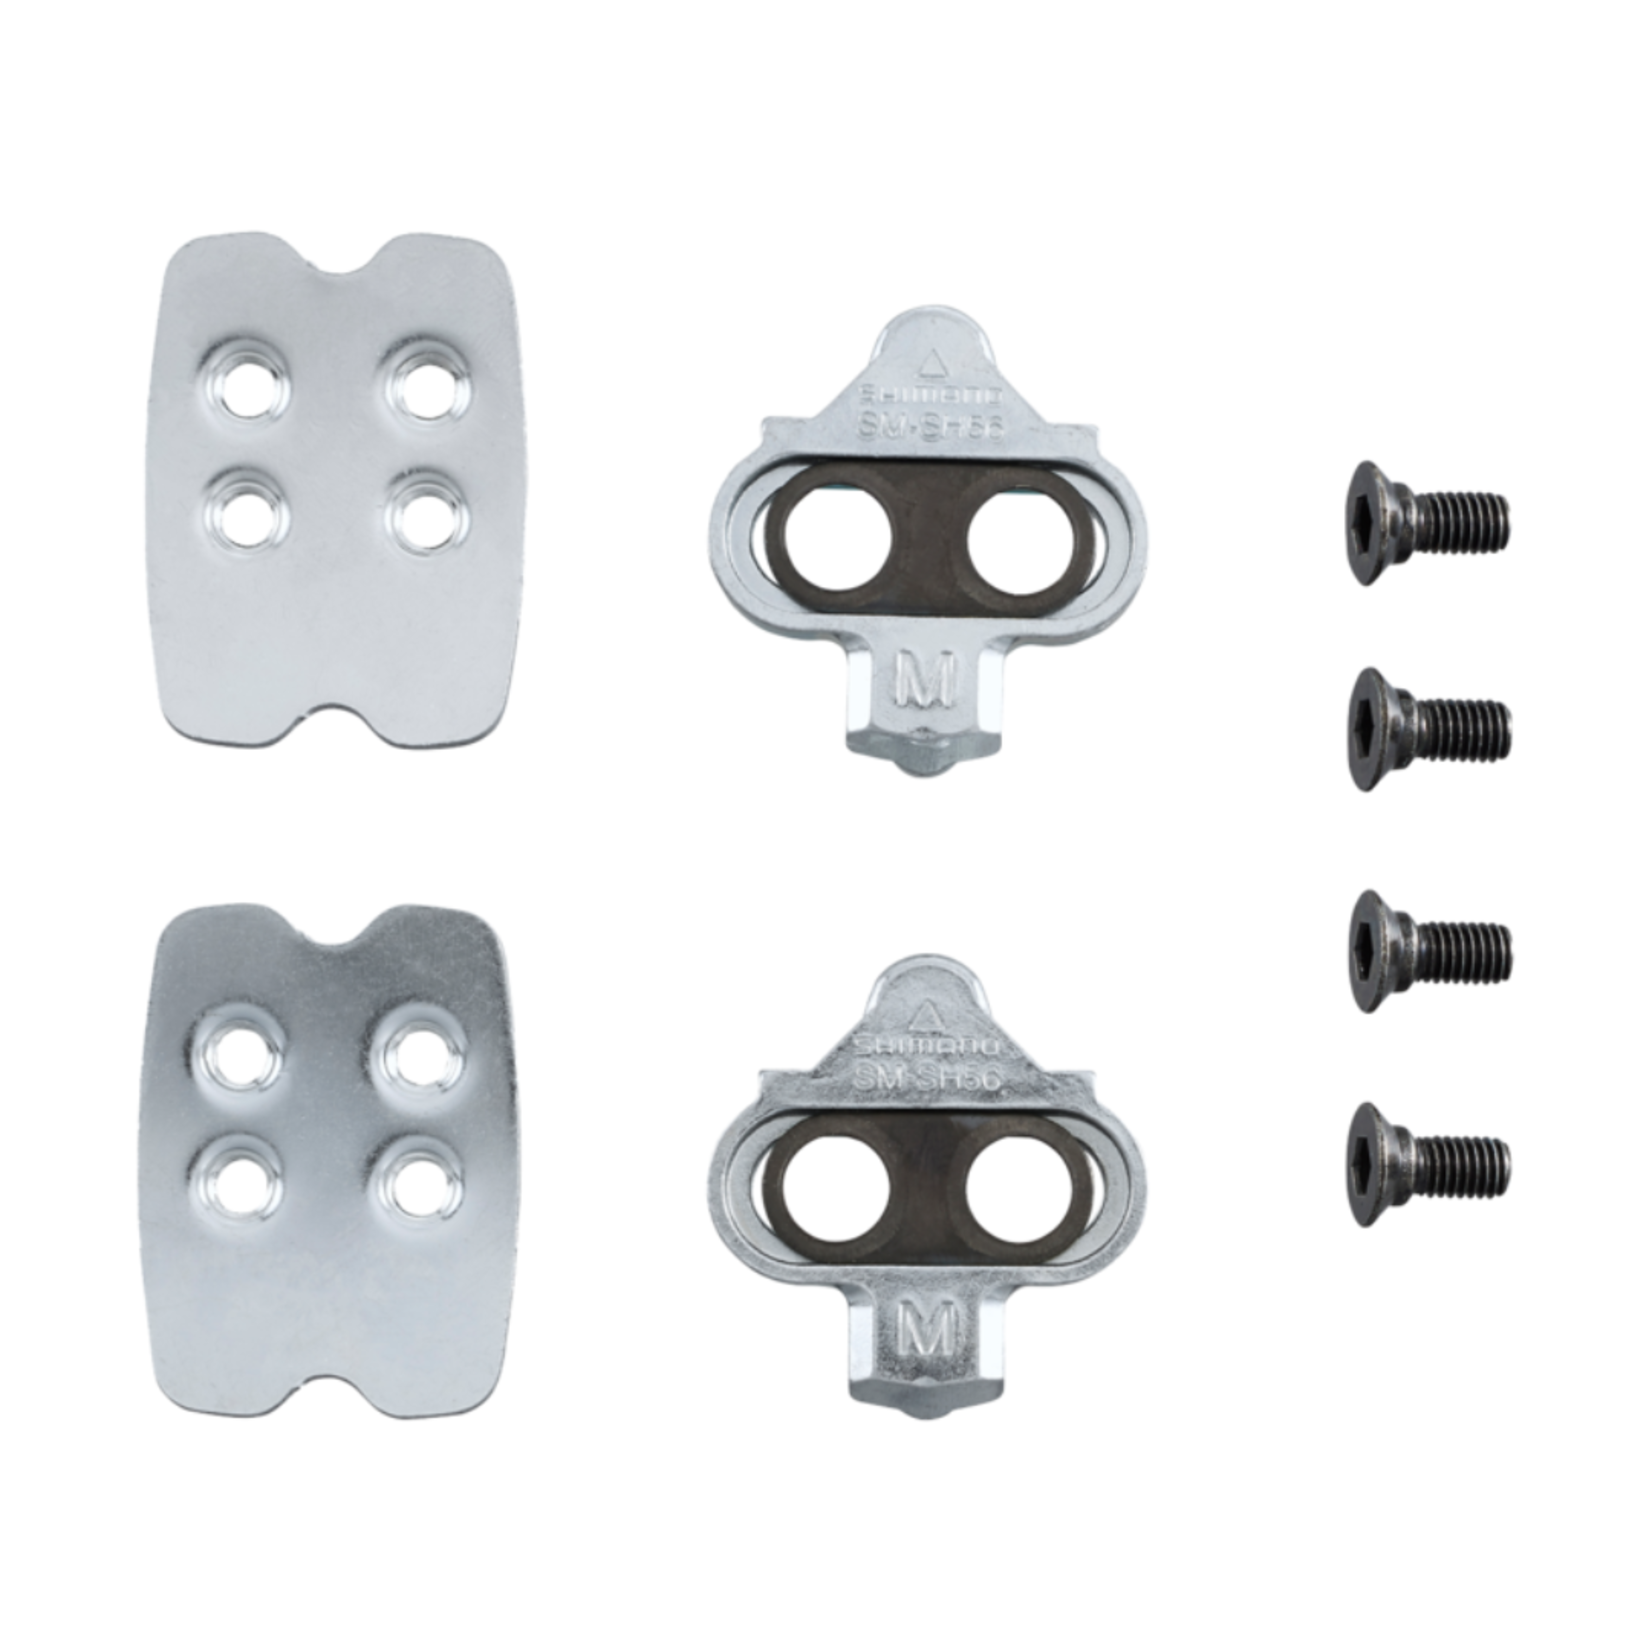 Shimano Shimano SM-SH56 Multi Release SPD Cleat Set With Cleat Nut